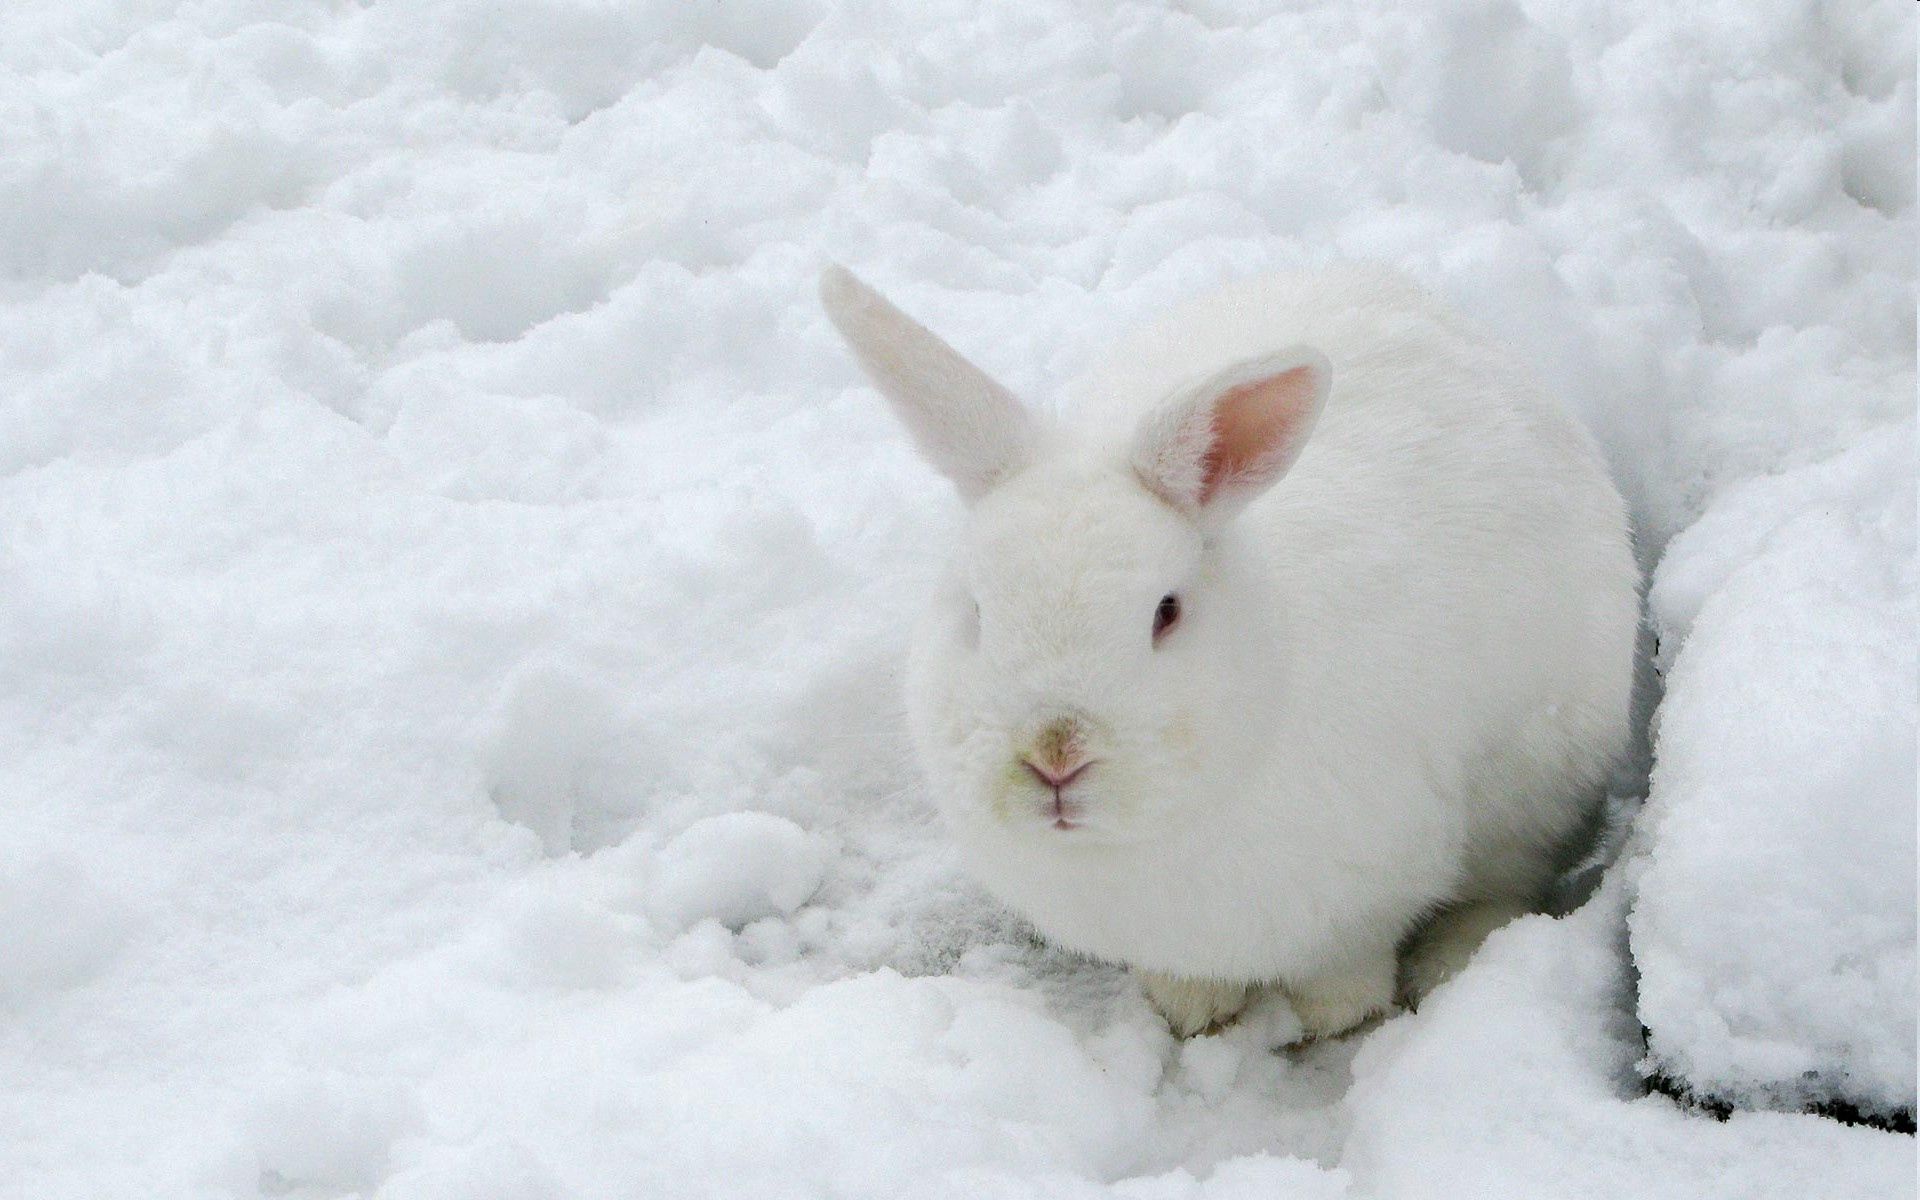 113812 download wallpaper animals, winter, snow, color, disguise, camouflage, hare screensavers and pictures for free